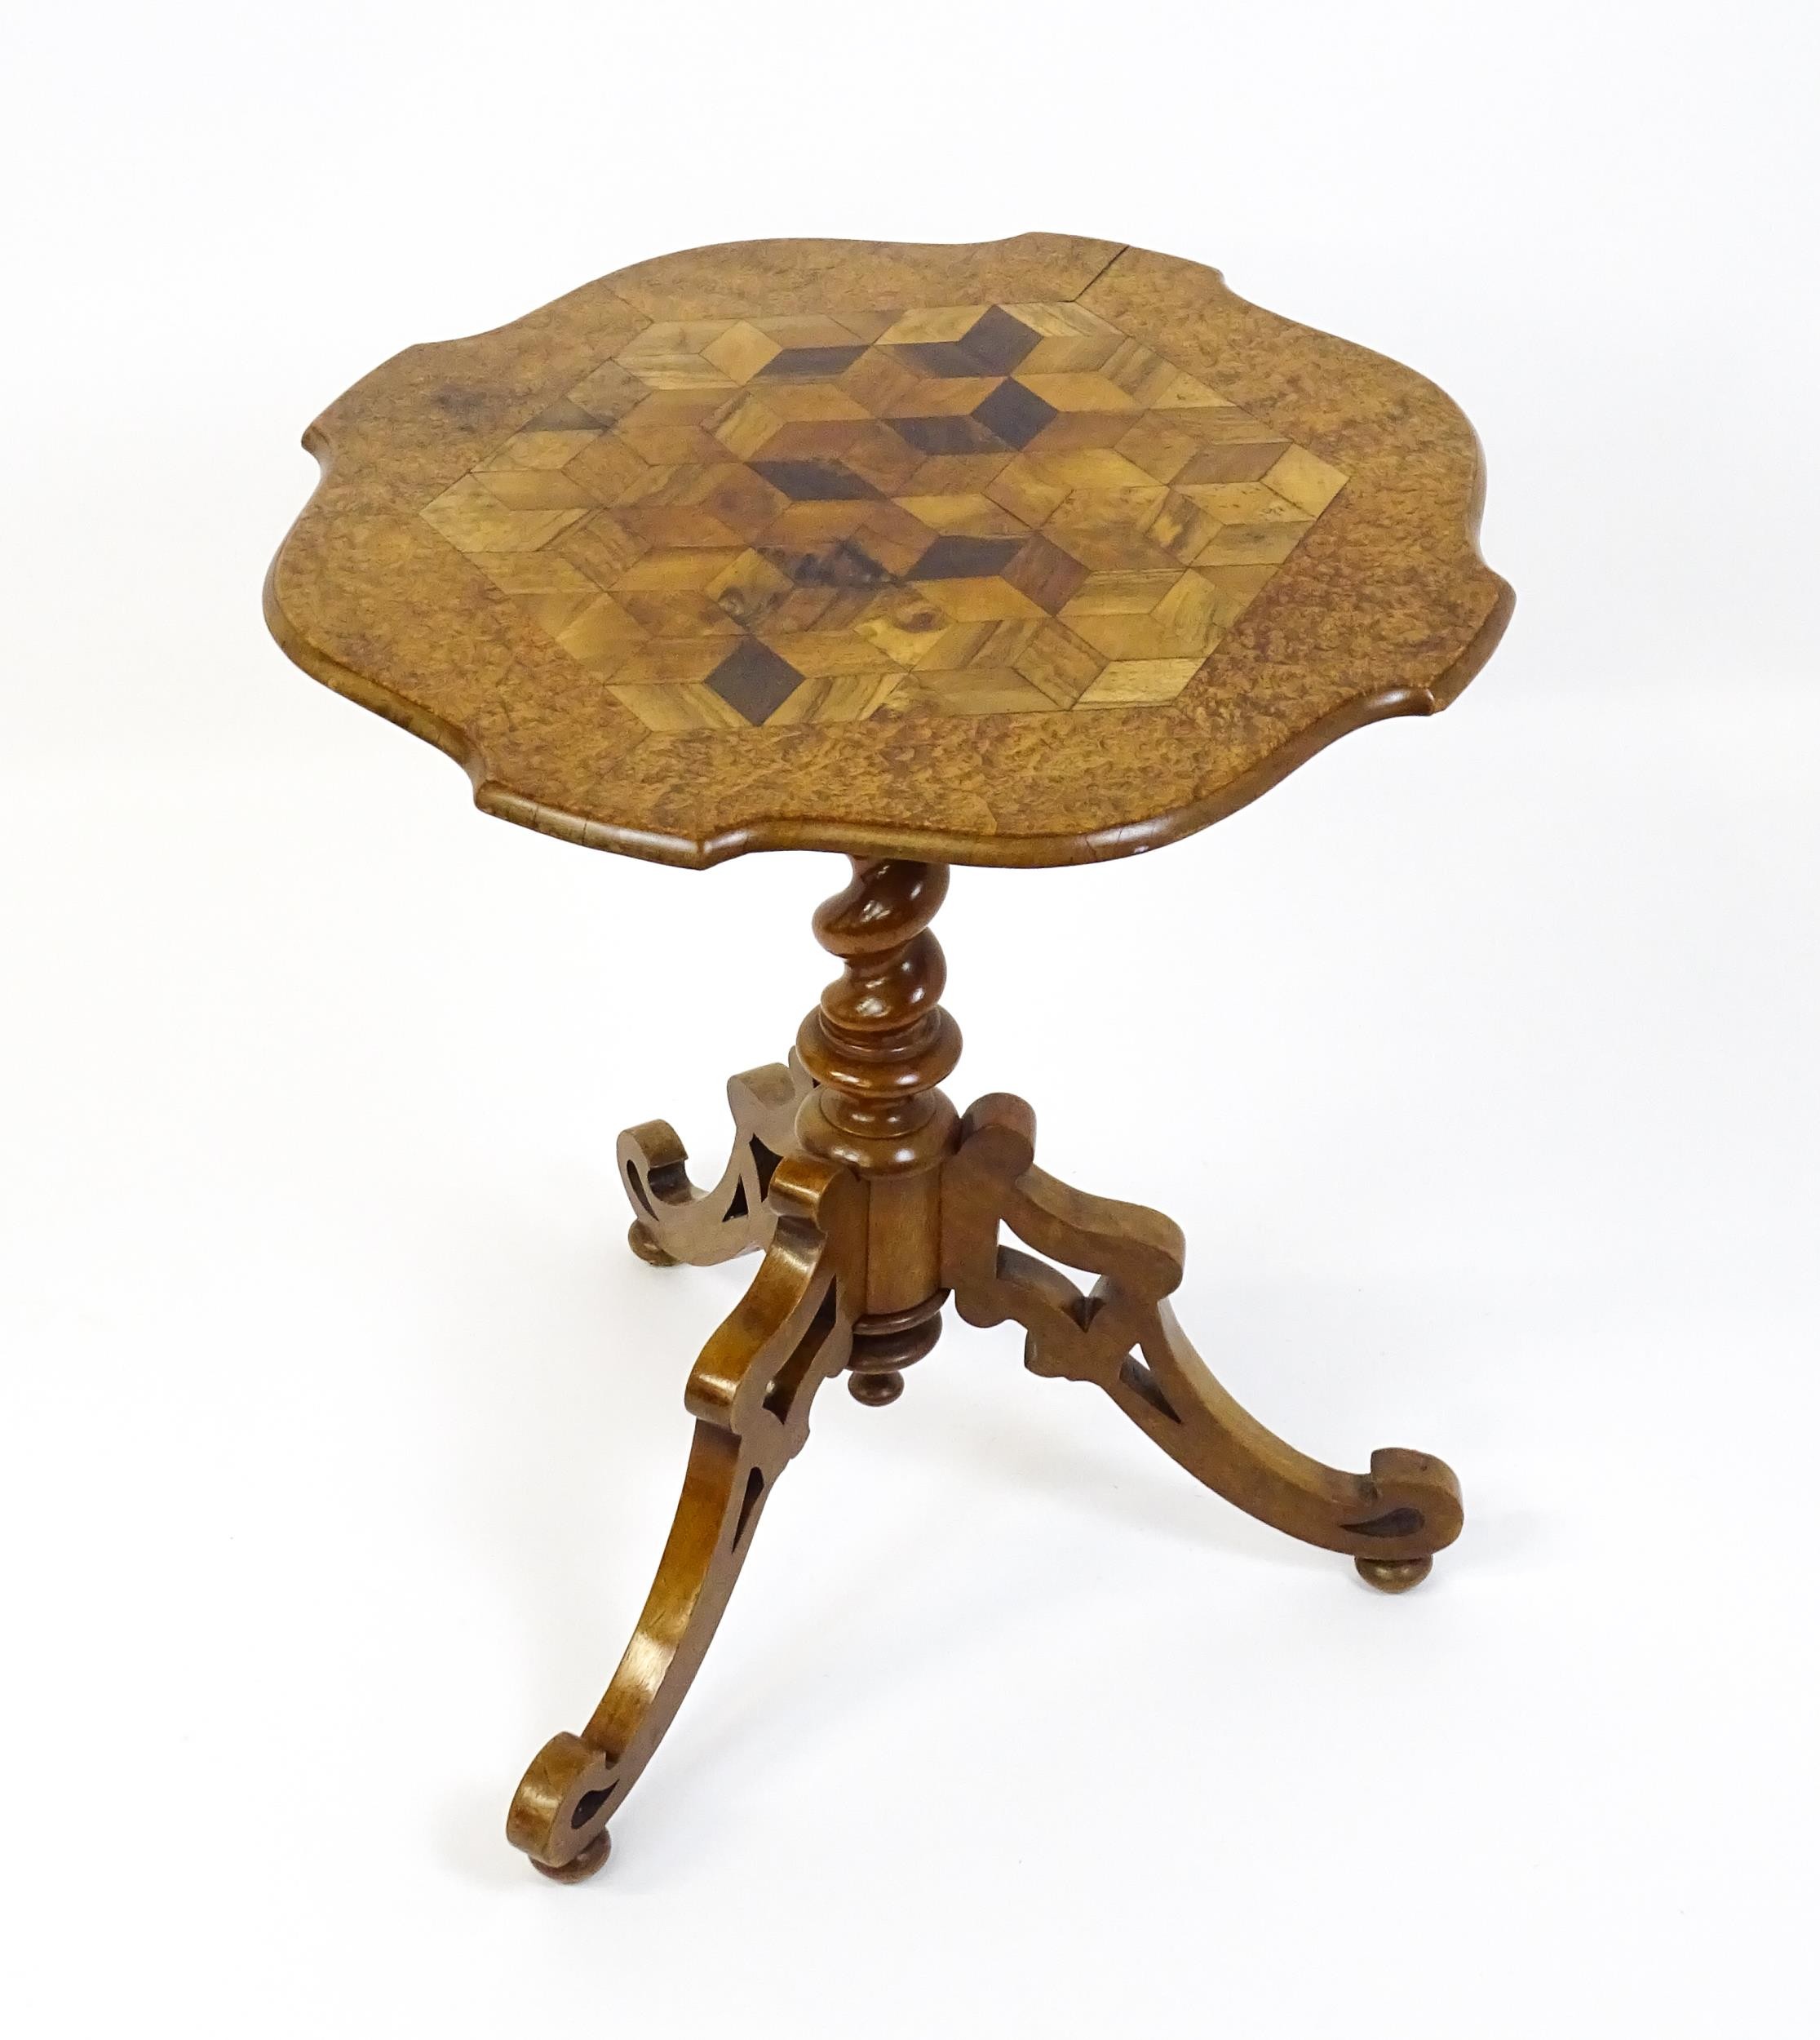 A 19thC tripod table with a burr amboyna veneered top surrounding a central parquetry style sample - Image 7 of 10